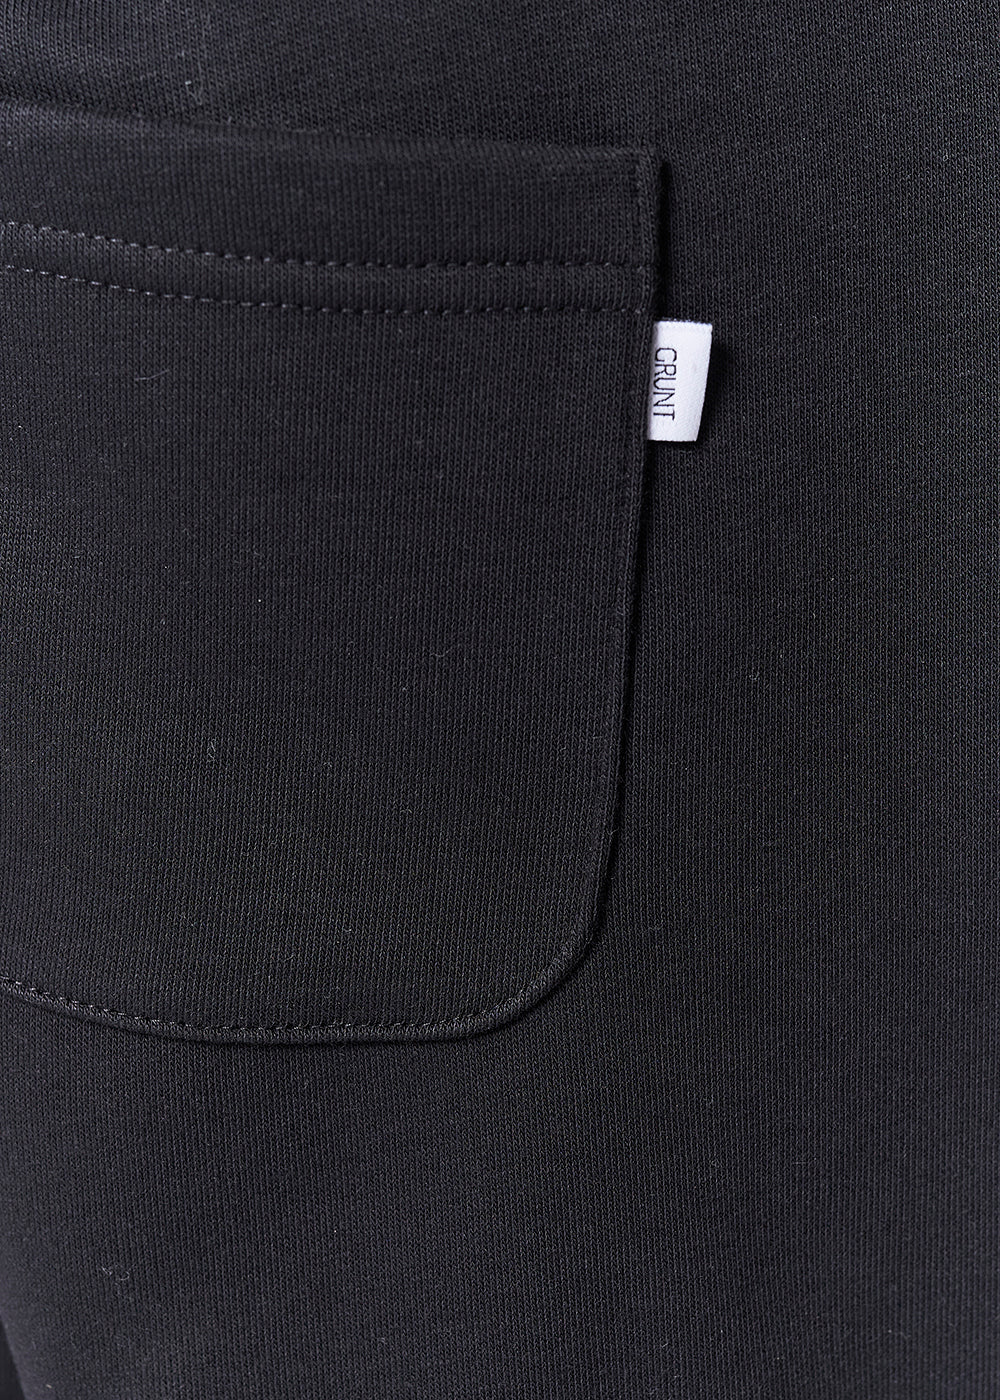 GRUNT / OUR Ask Jog Pant